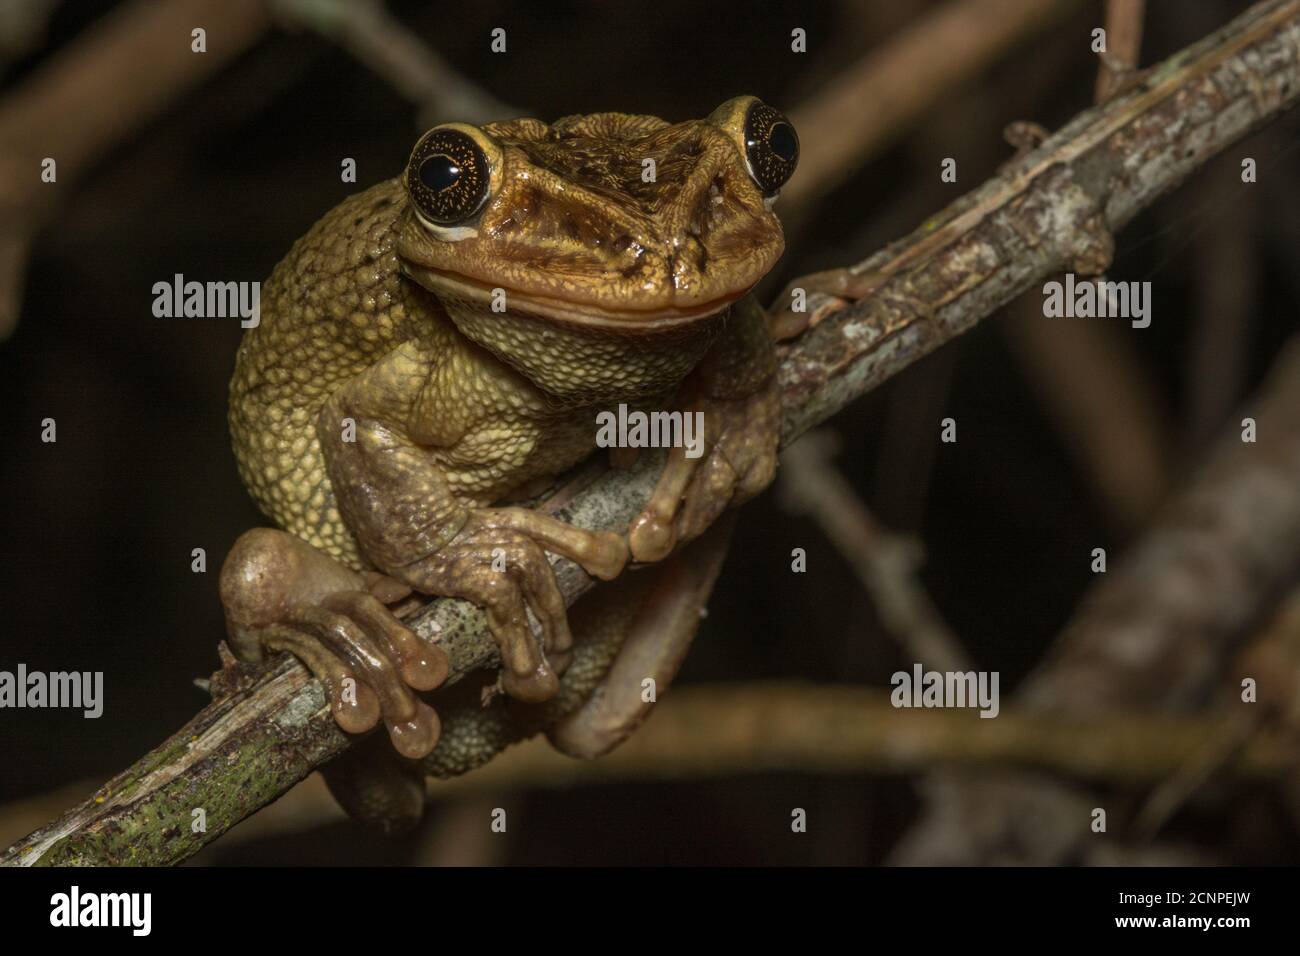 Jordan's casque headed tree frog (Trachycephalus jordani) from the dry forests of Western Ecuador is one of the most unusual frogs in the country. Stock Photo